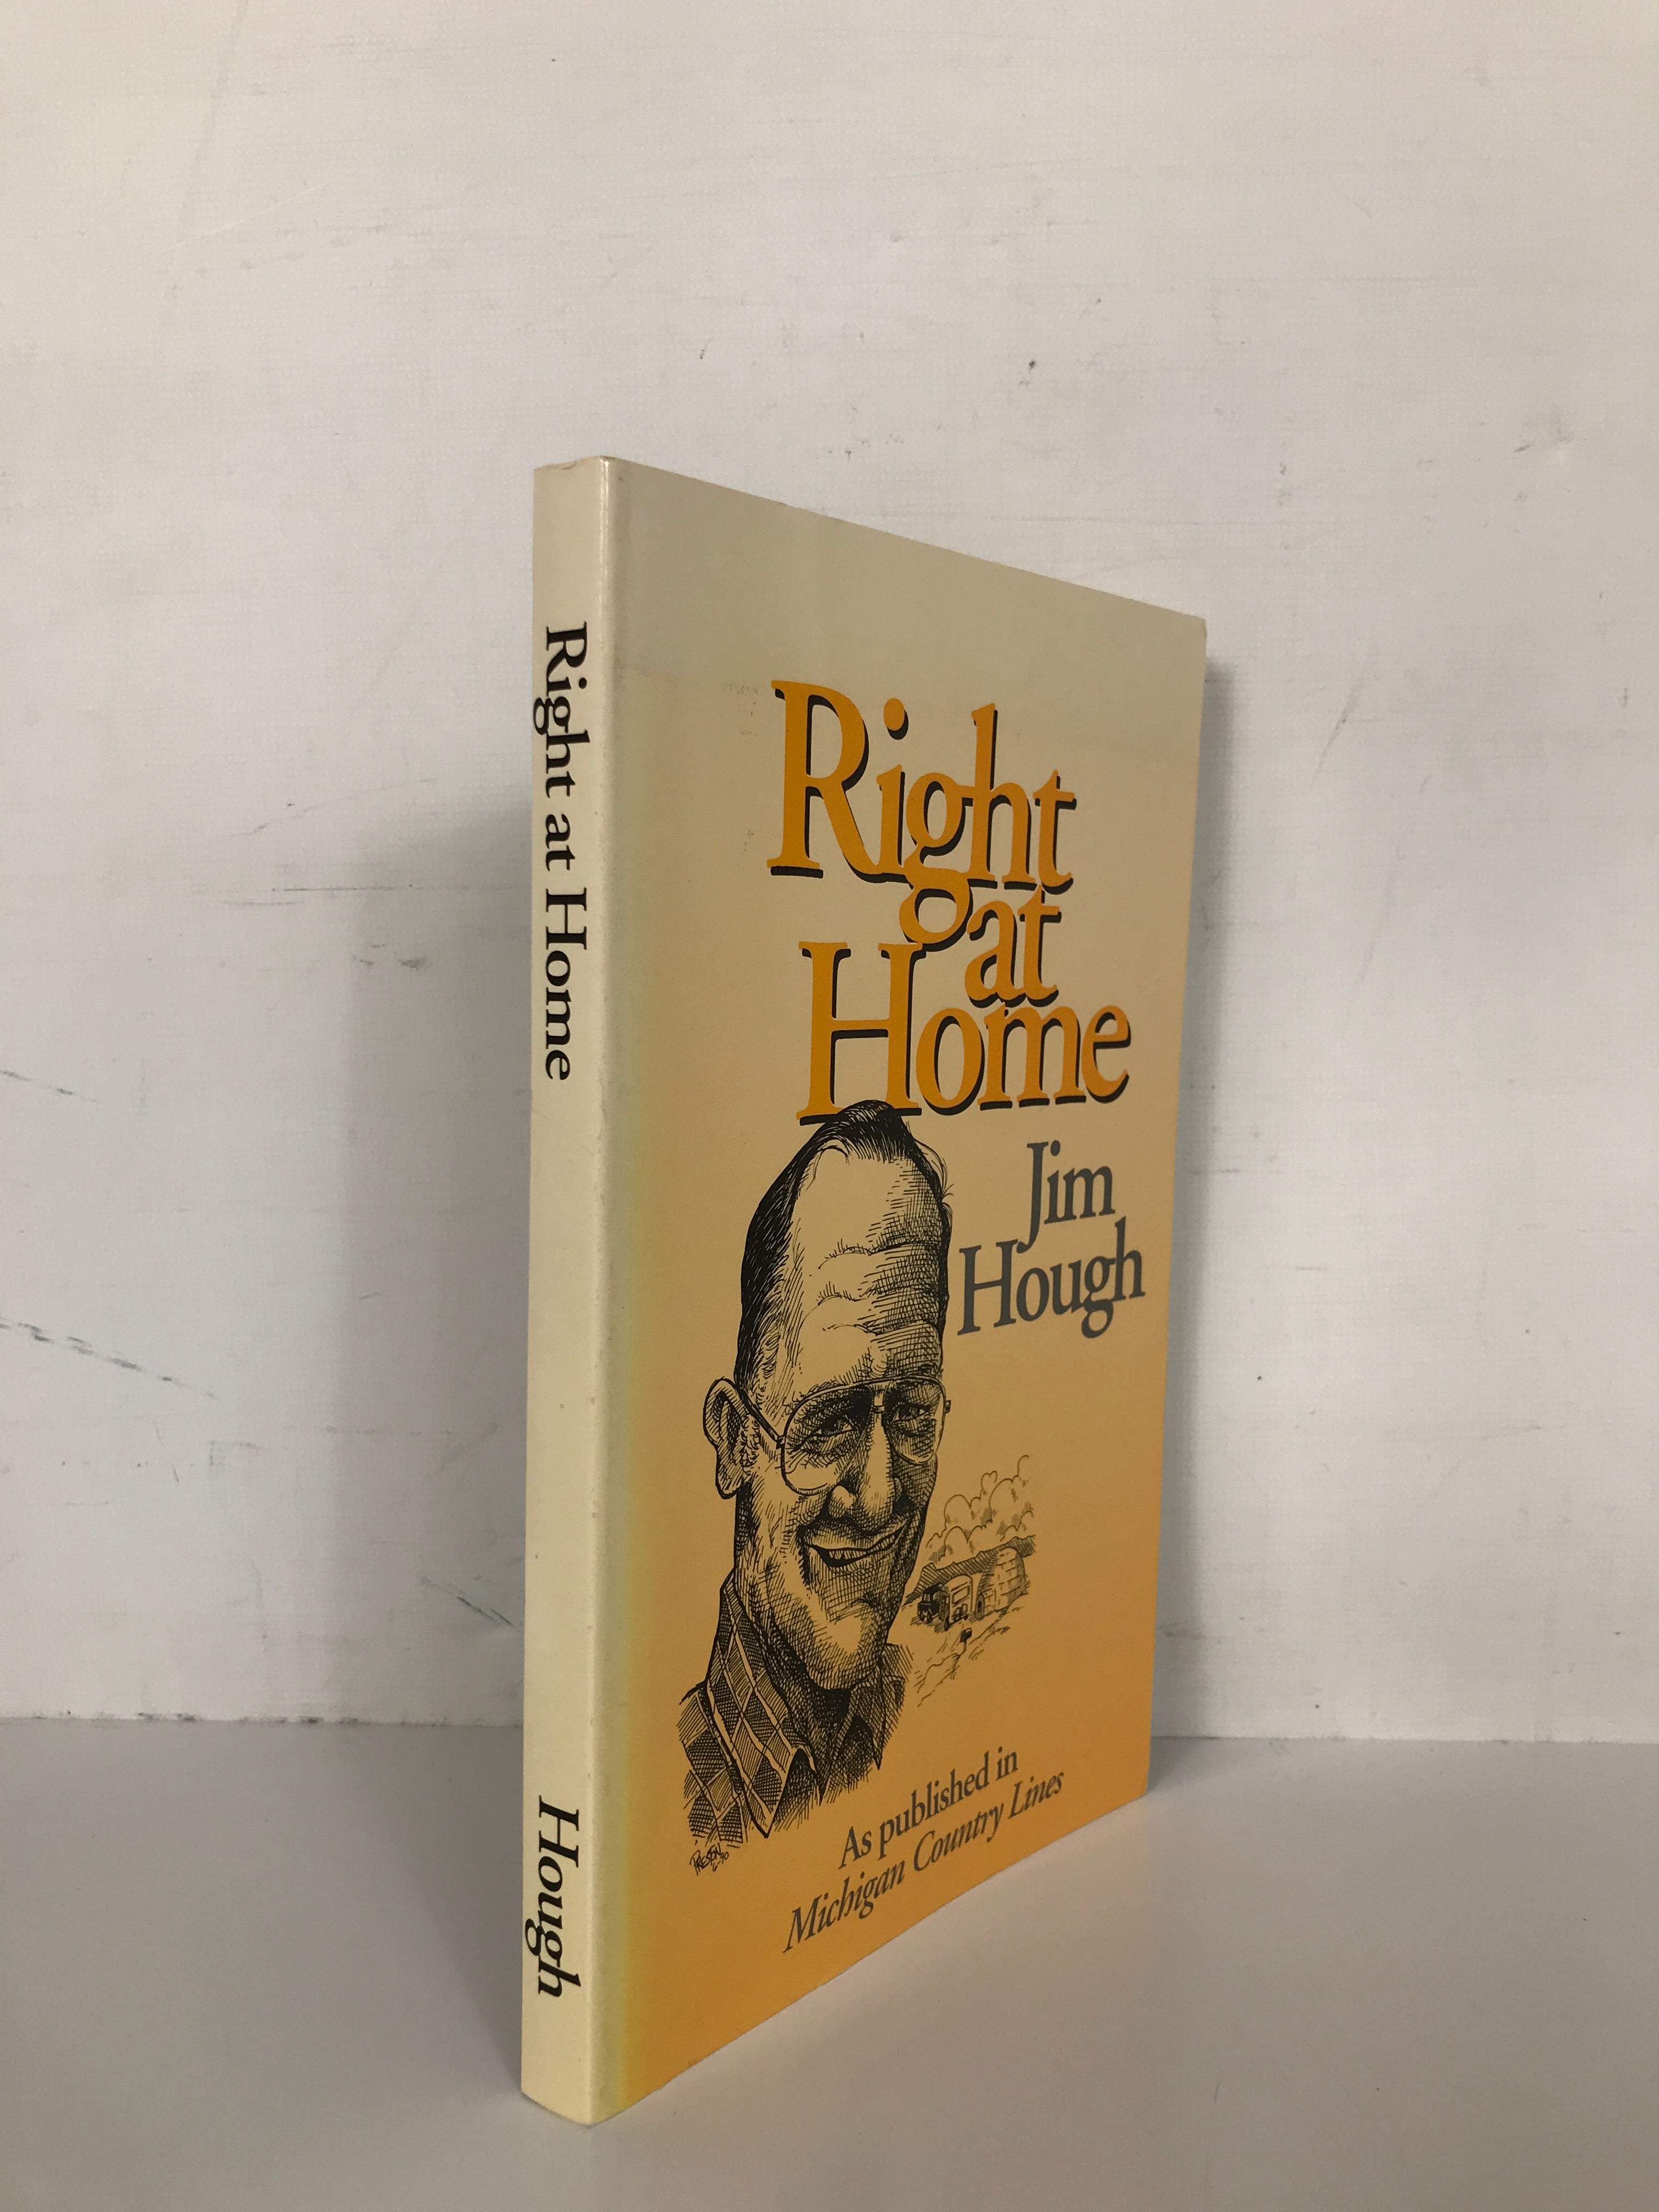 Right at Home by Jim Hough Signed 1994 SC Lansing State Journal Columnist